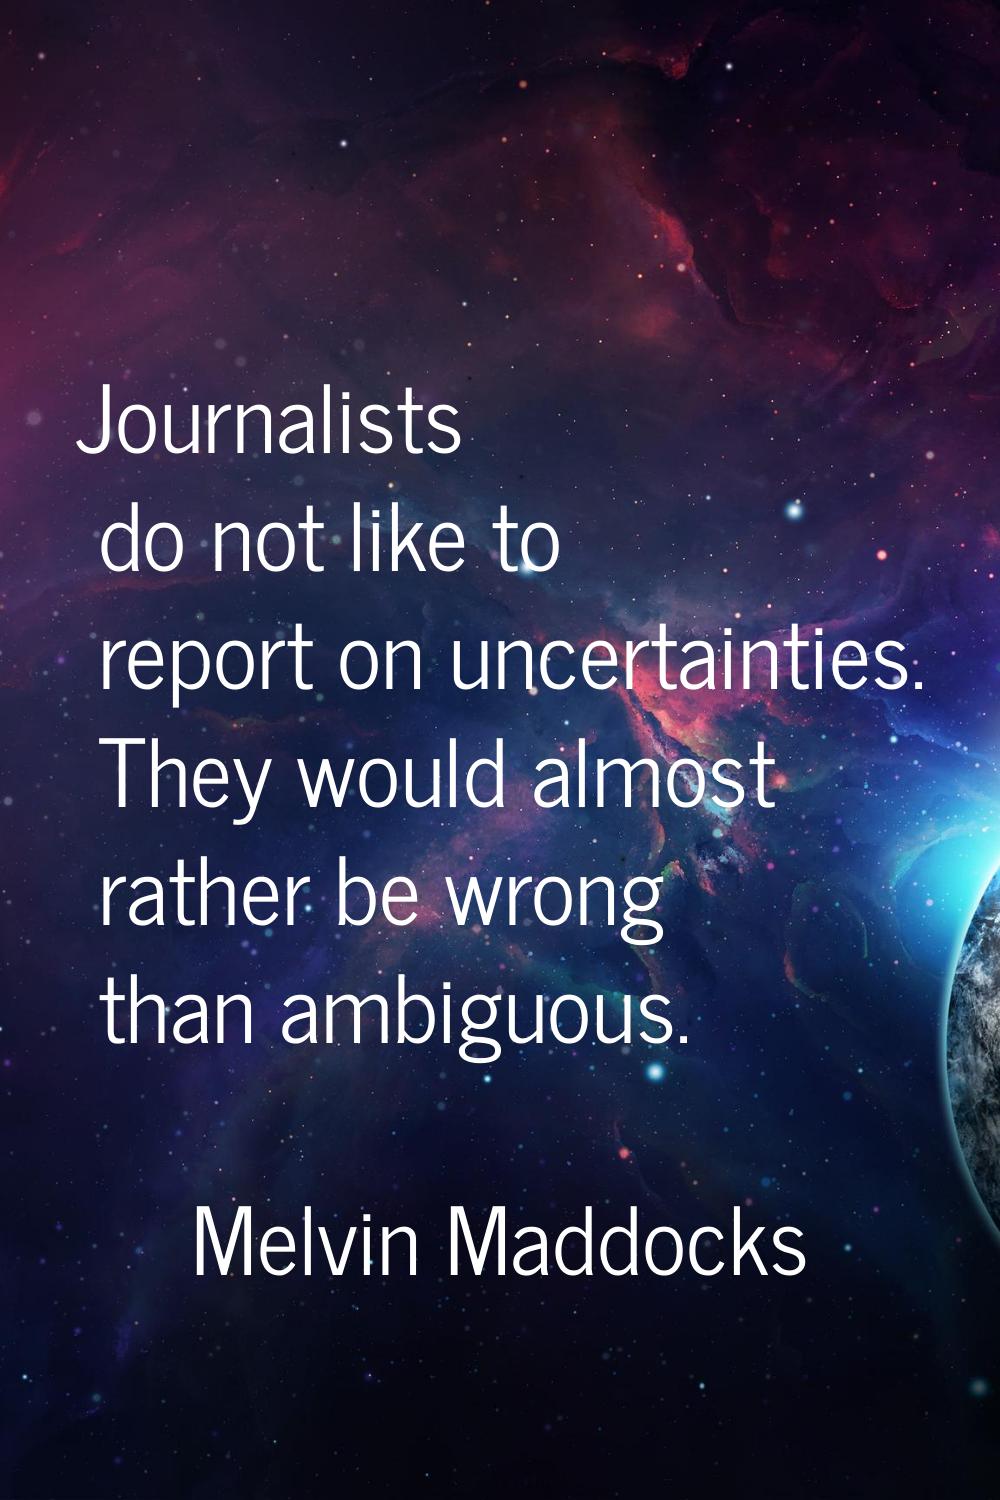 Journalists do not like to report on uncertainties. They would almost rather be wrong than ambiguou